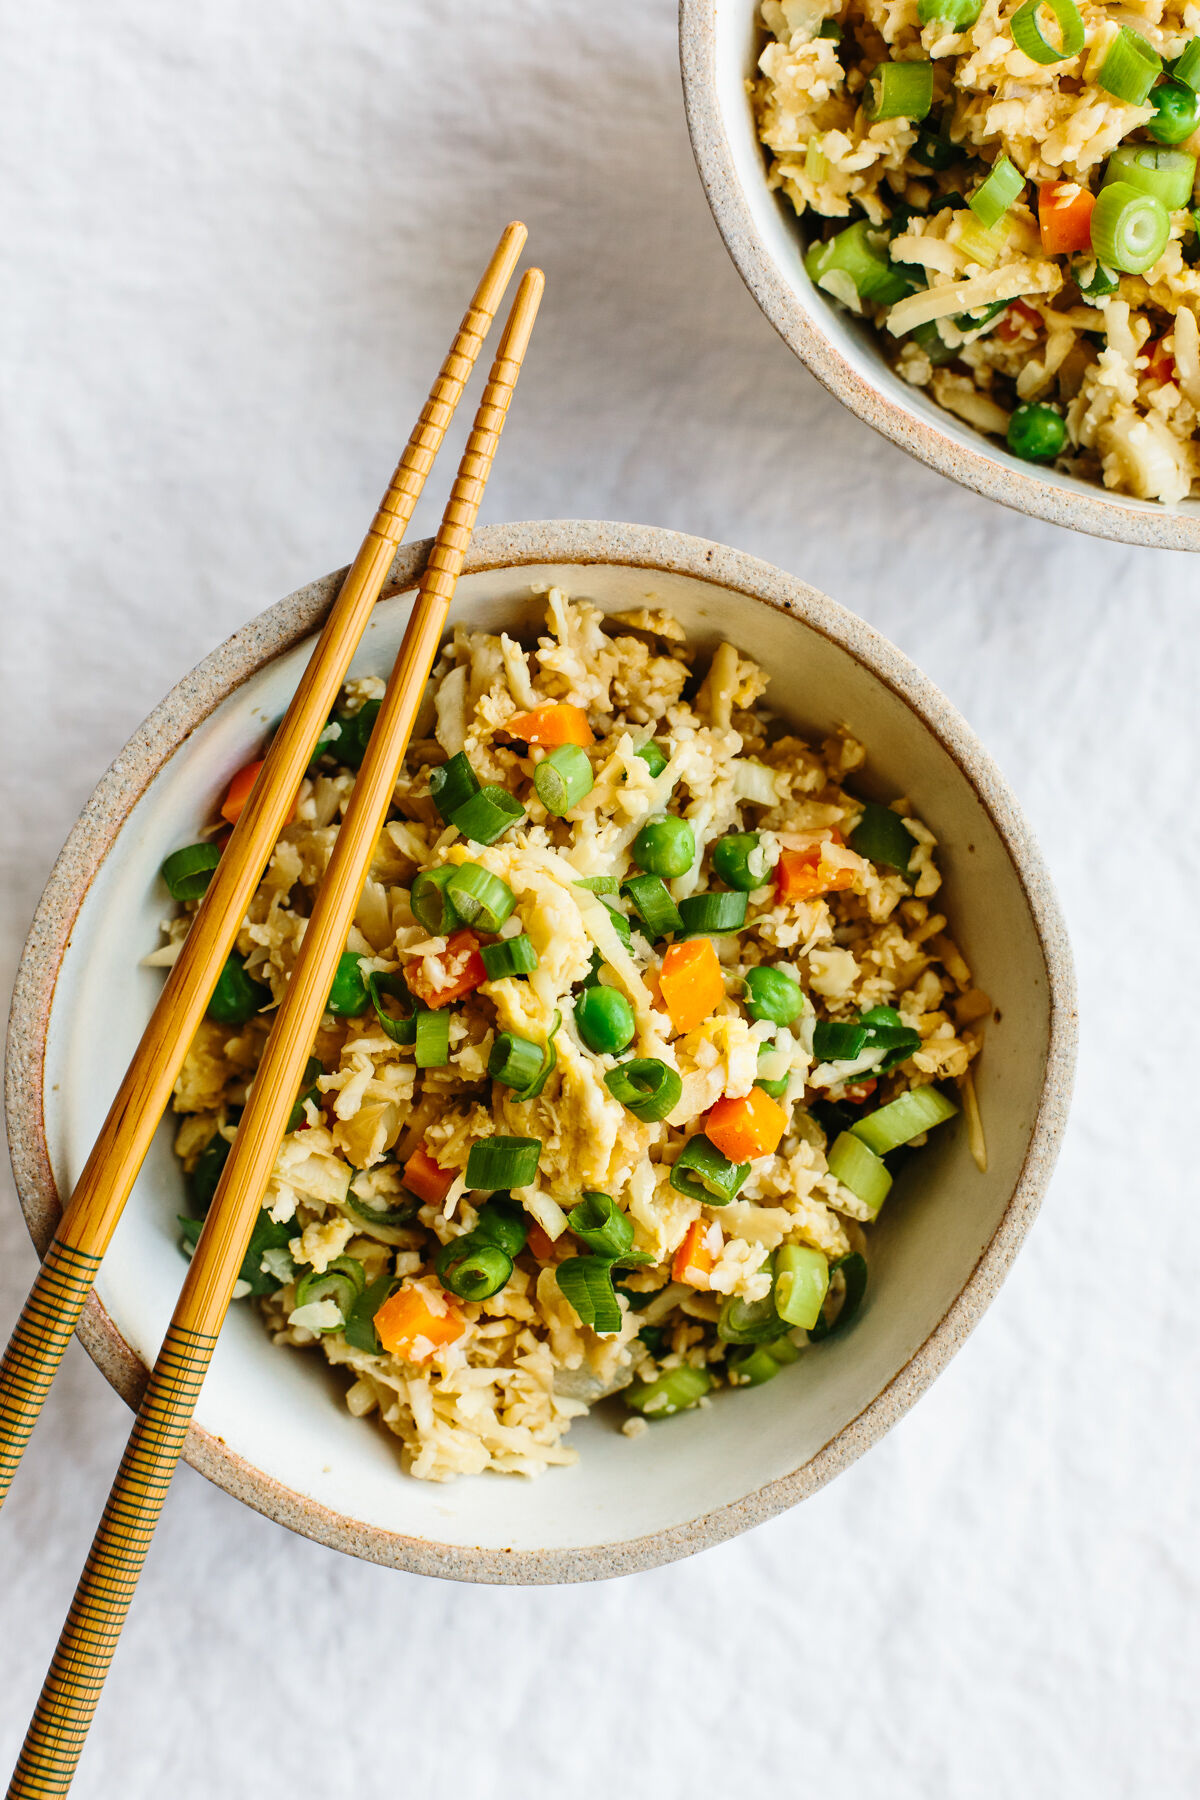 Cauliflower Fried Rice with Peas, Carrots and Scallions | The Feedfeed